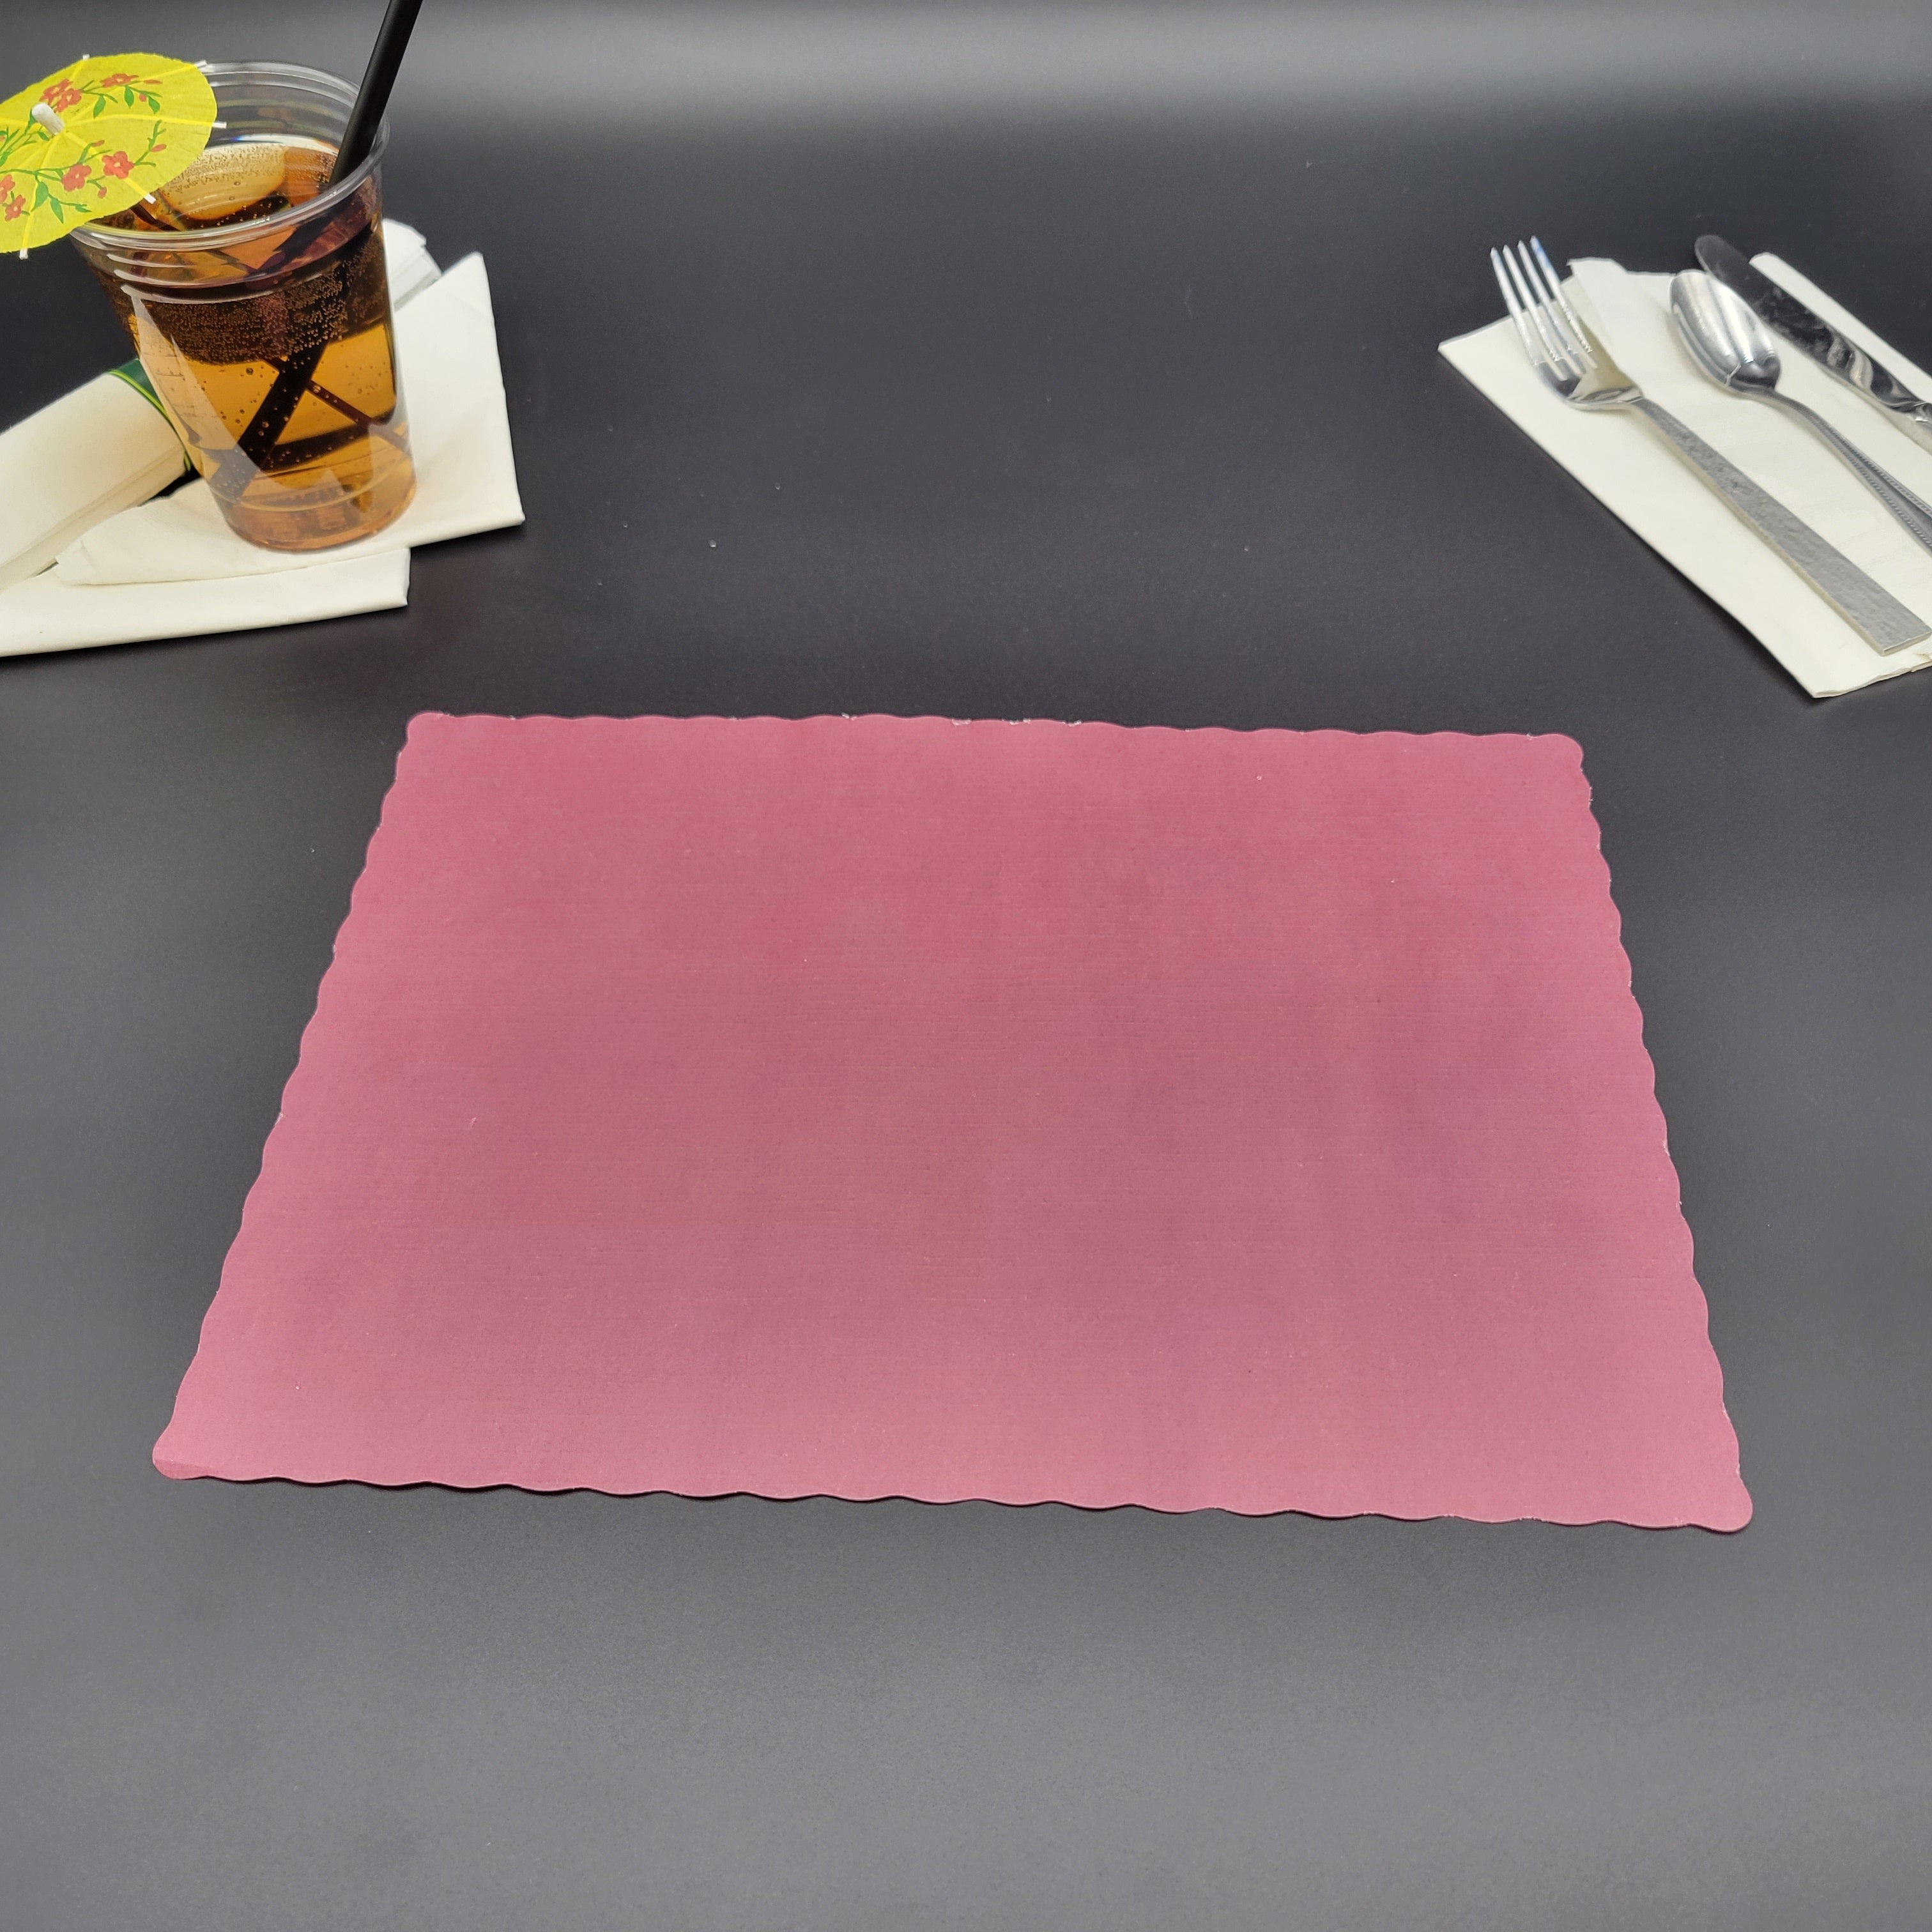 Paper Placemat With Scalloped Edge Burgundy 10" x 14" - 1000/Case